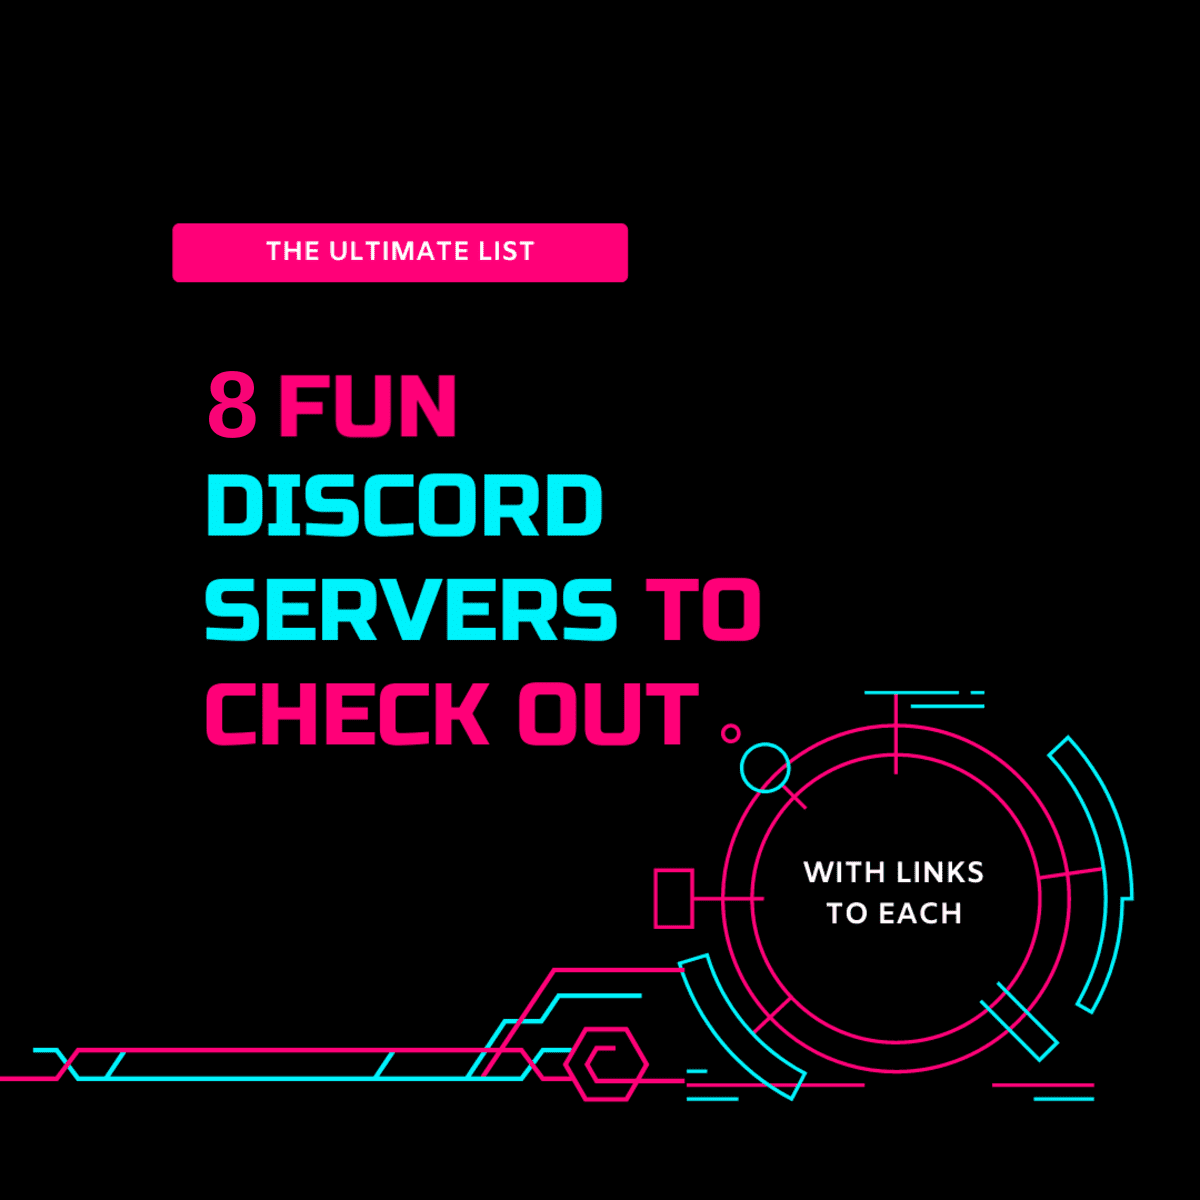 server #joindiscordserver #discord #bestserver #fun #awesome #discord